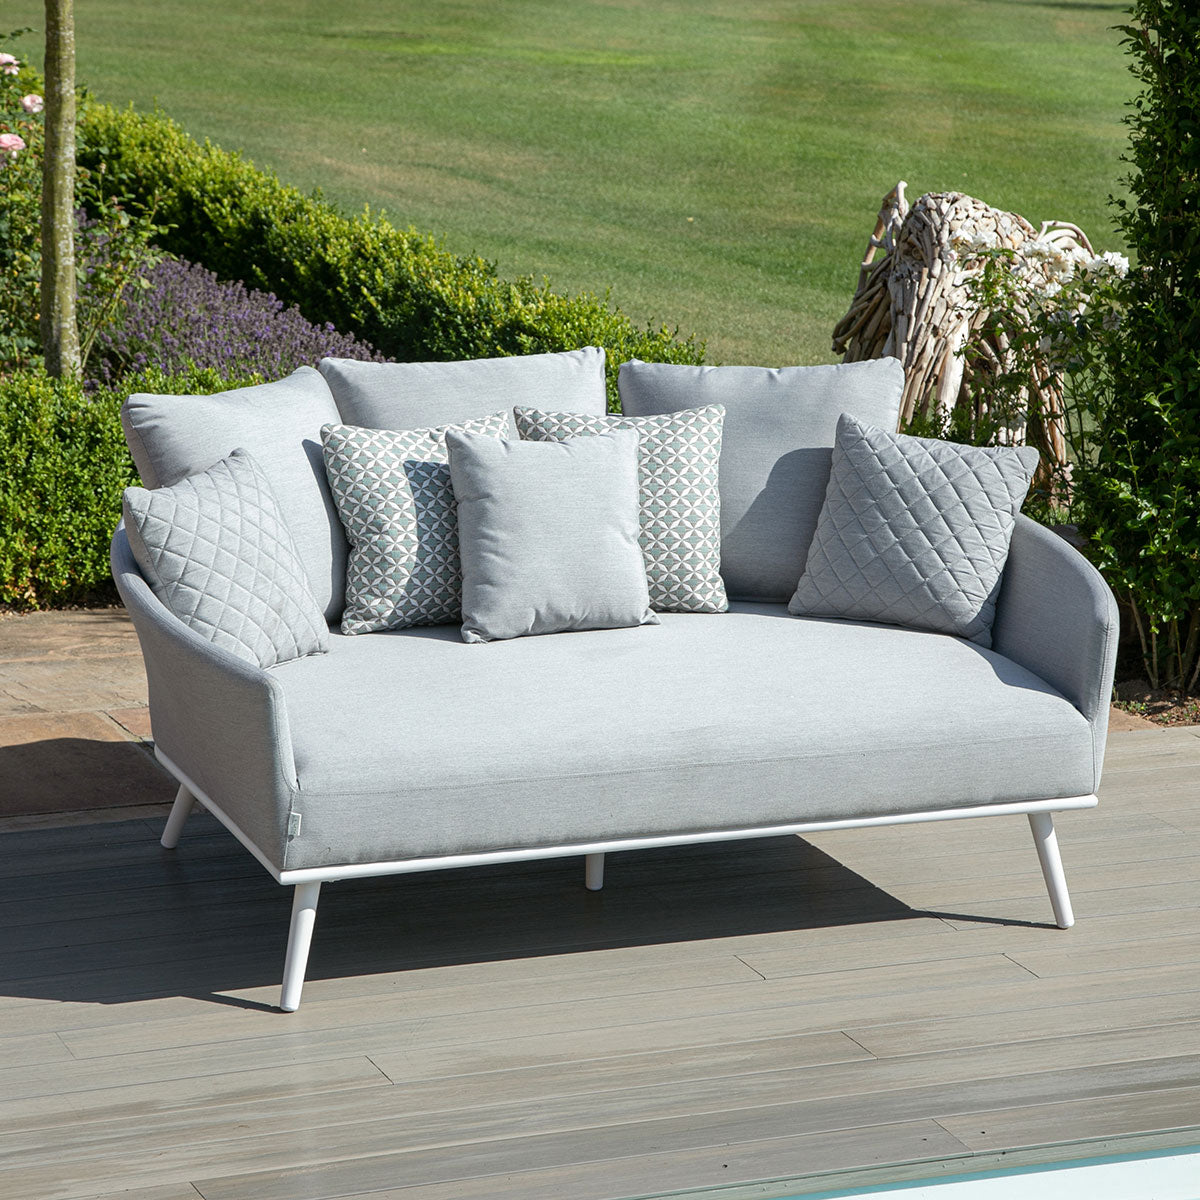 Outdoor Fabric Ark Daybed